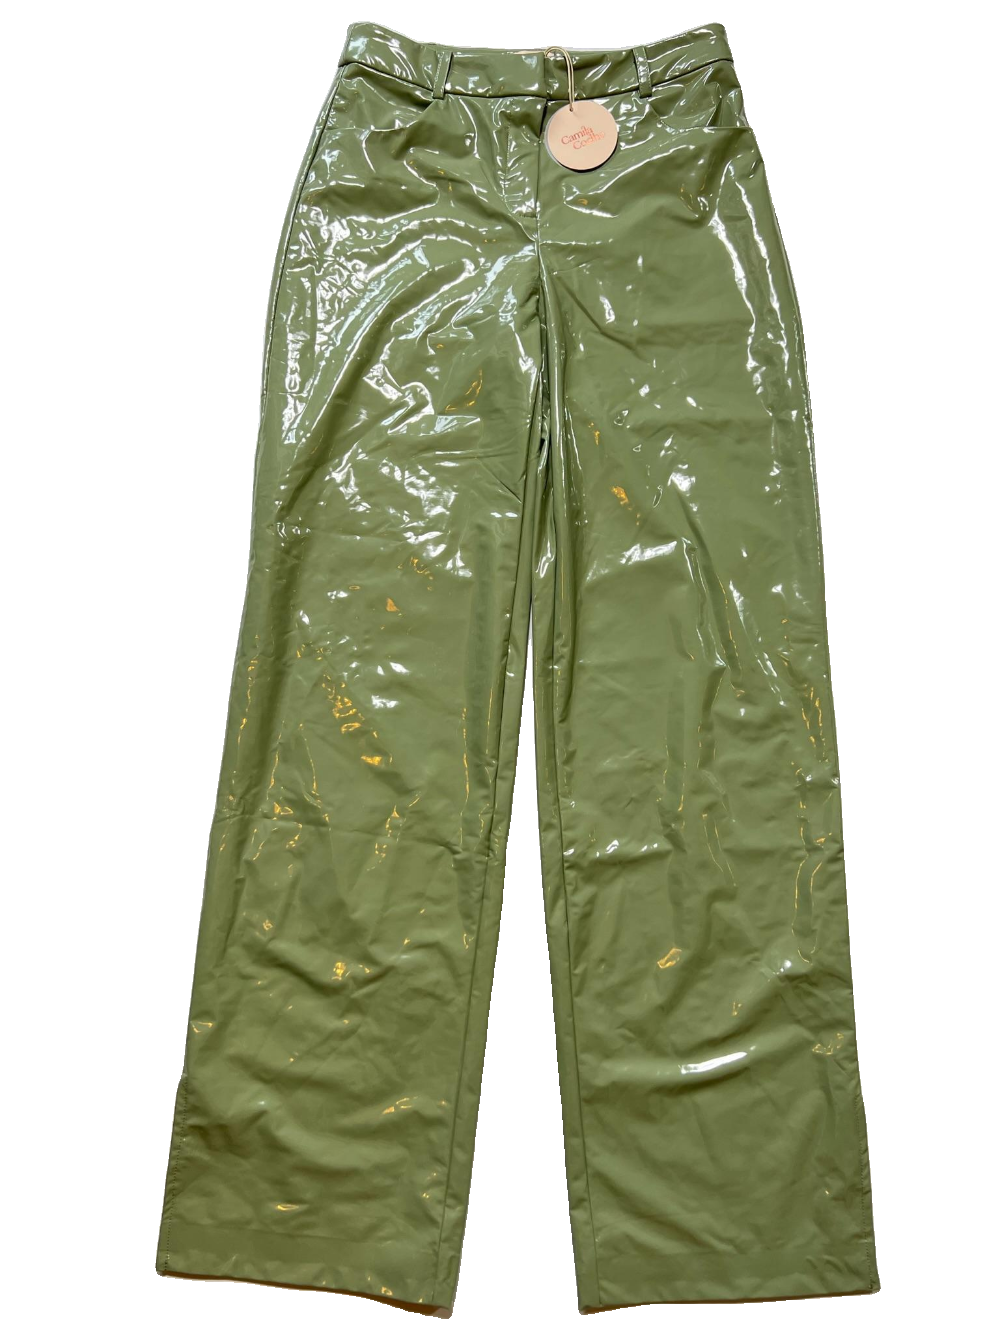 Camila Coelho - Green Leather Pants - NEW WITH TAGS